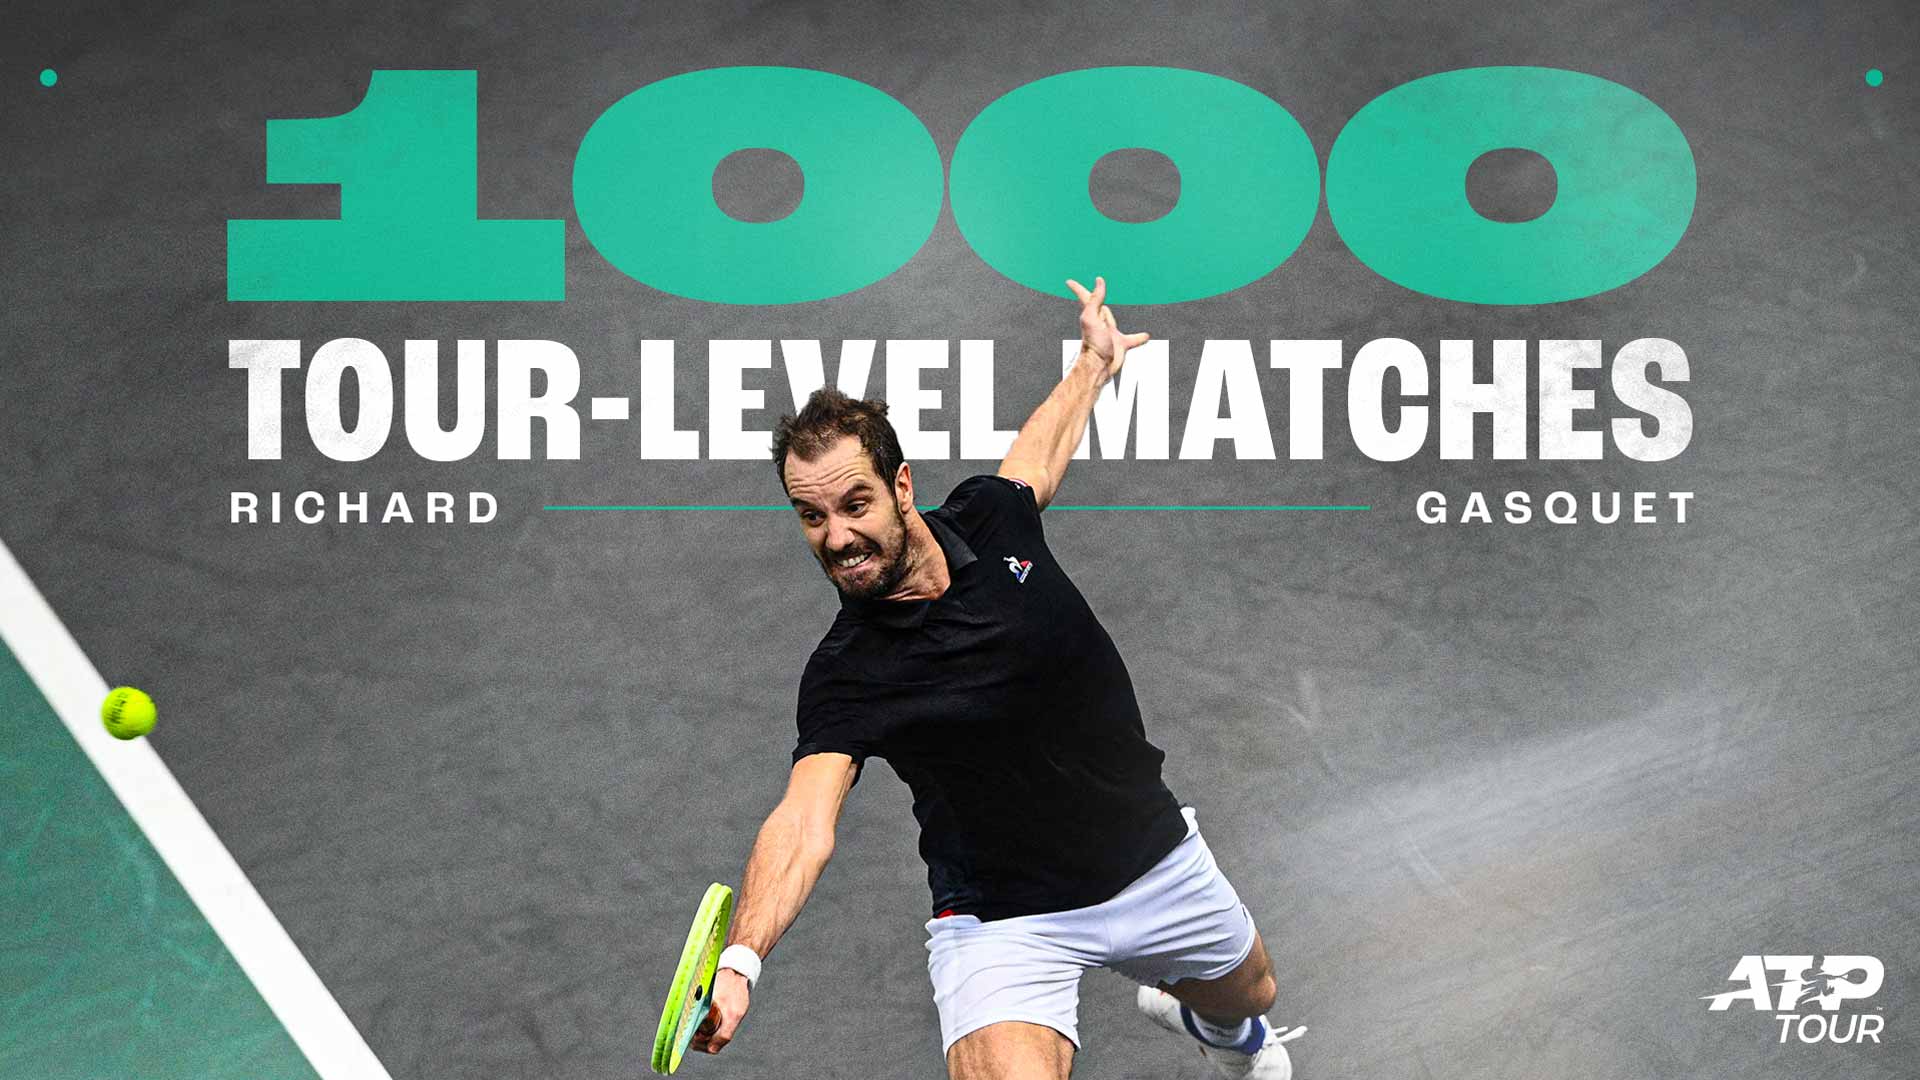 Take 2: Gasquet to play 1,000th match Thursday in Madrid